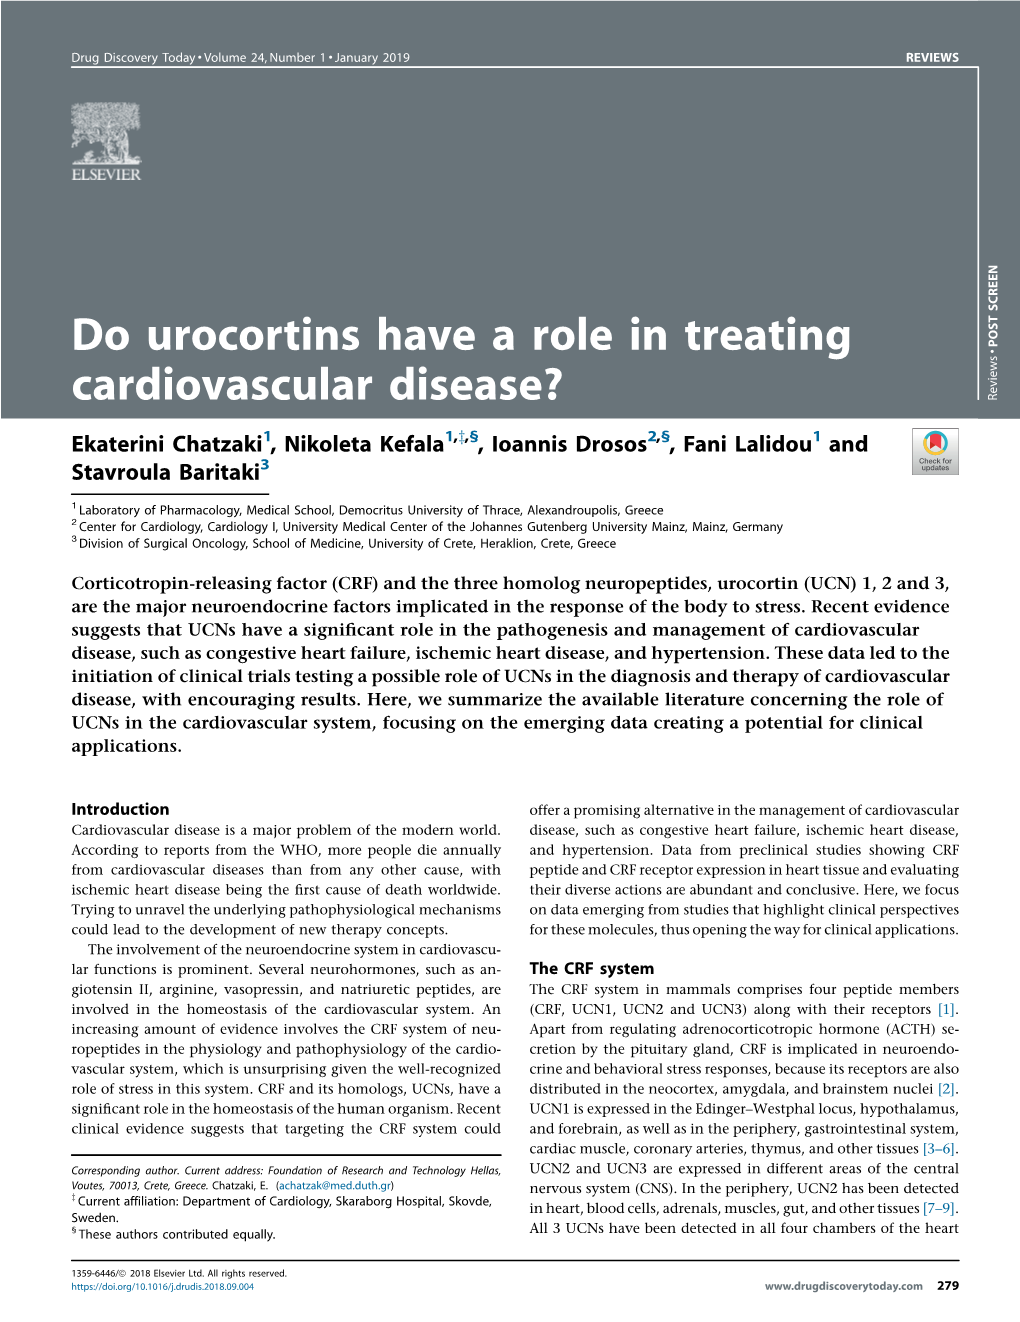 Do Urocortins Have a Role in Treating Cardiovascular Disease?